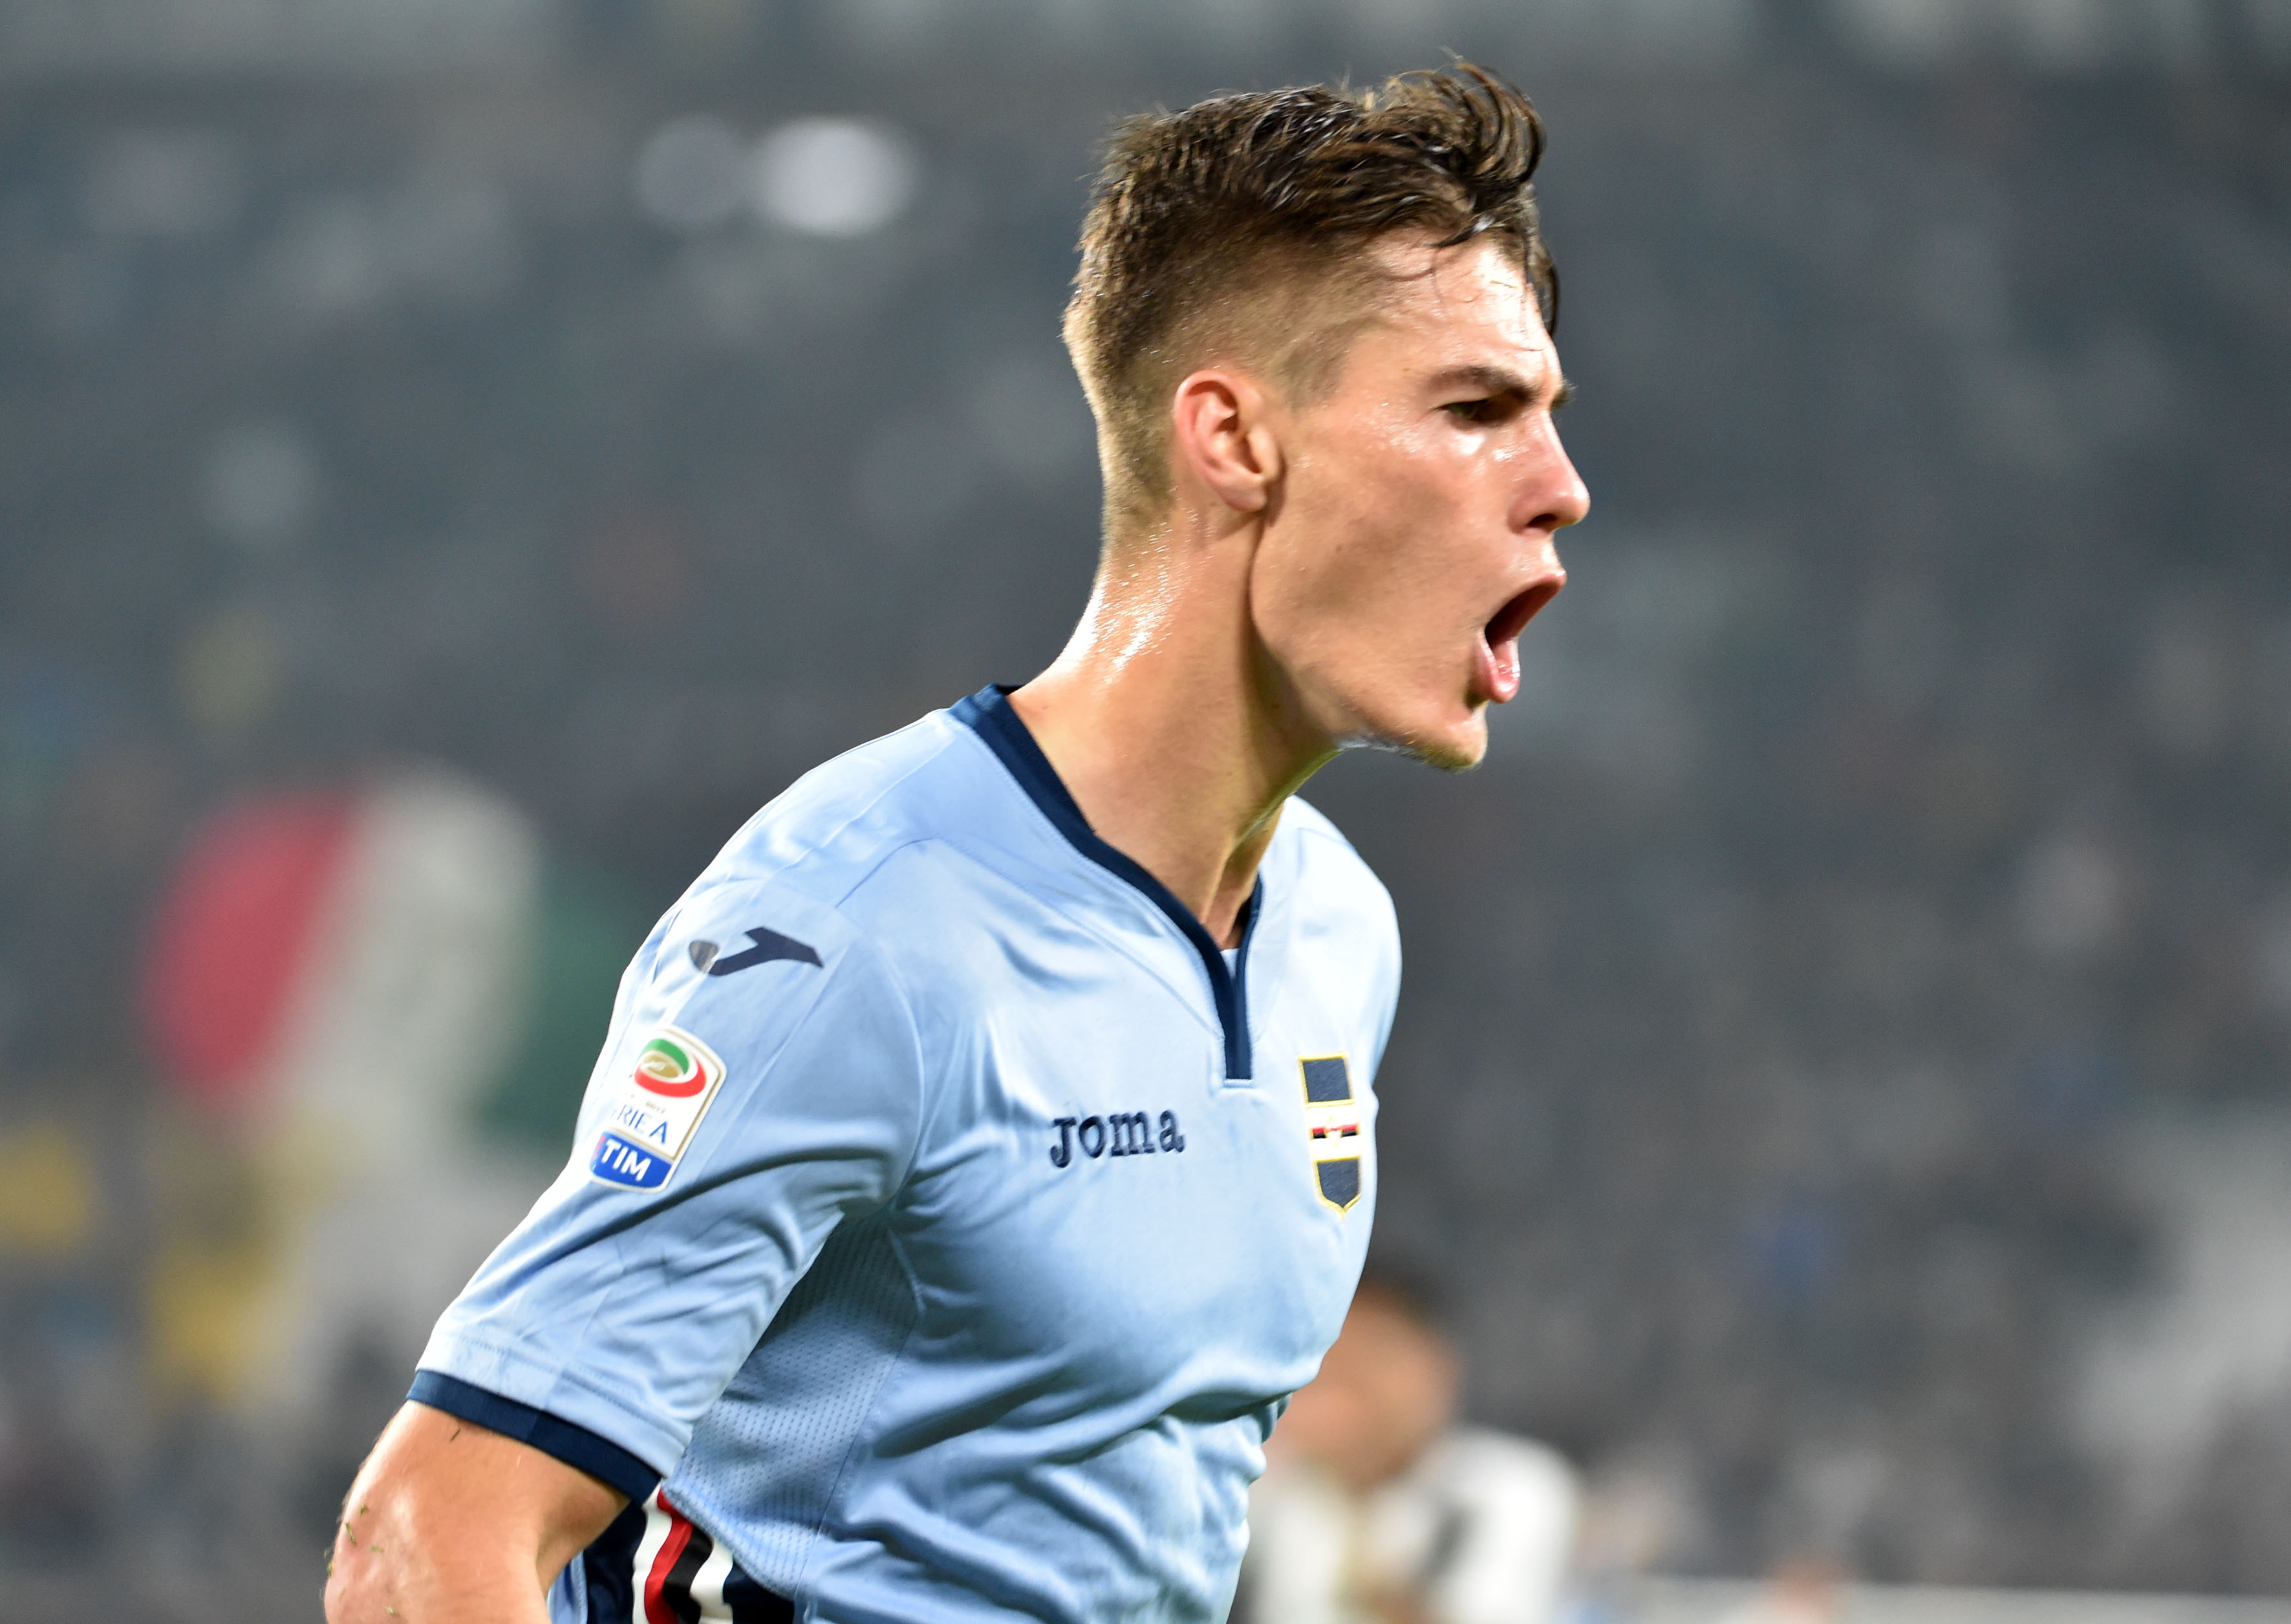 Schick’s agent to CM: “Our job is to talk to the most important club – he has a contract and will respect it”